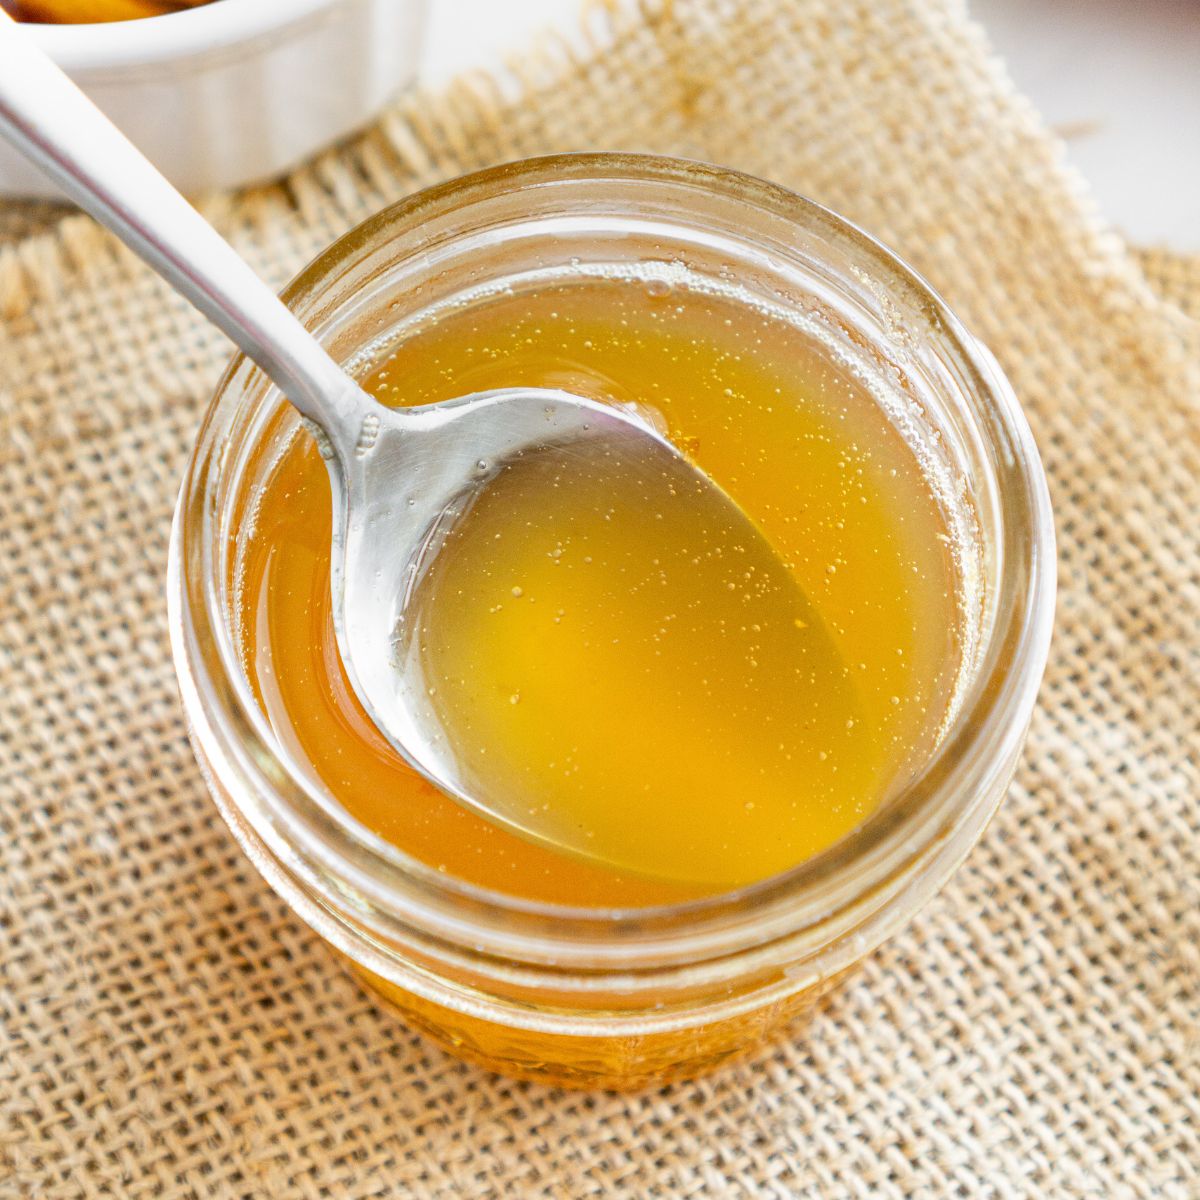 Spoon getting some honey ginger syrup from a jar